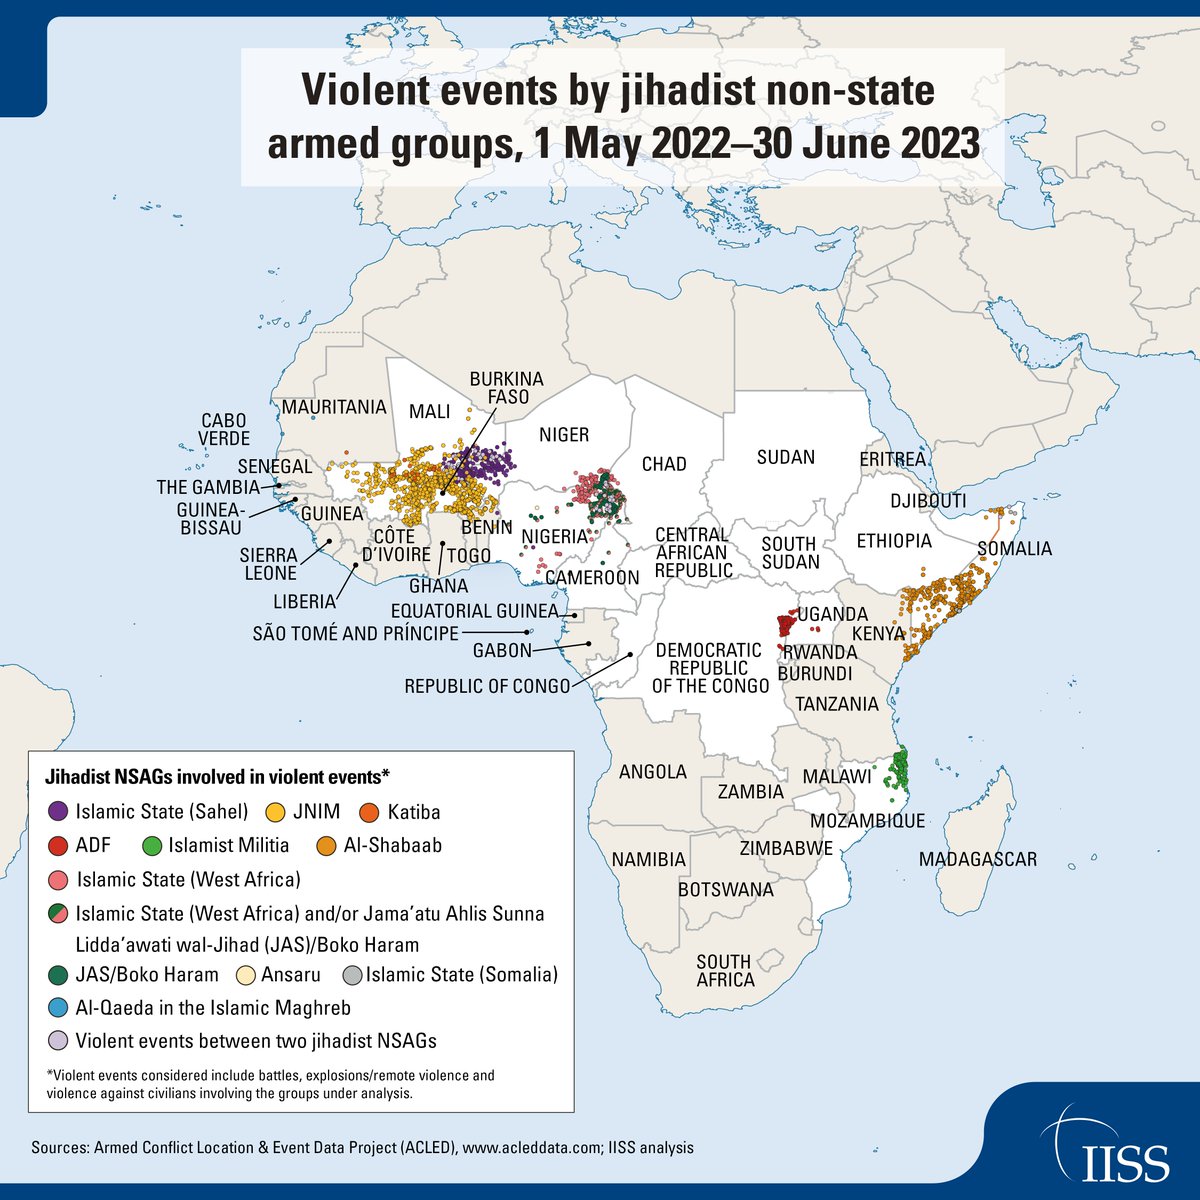 Sub-Saharan Africa is now the region with the greatest annual number of terrorist attacks globally. Read the Regional Spotlight of our latest Armed Conflict Survey and find out more about the changing nature of Sub-Saharan jihadism: go.iiss.org/41knYdy